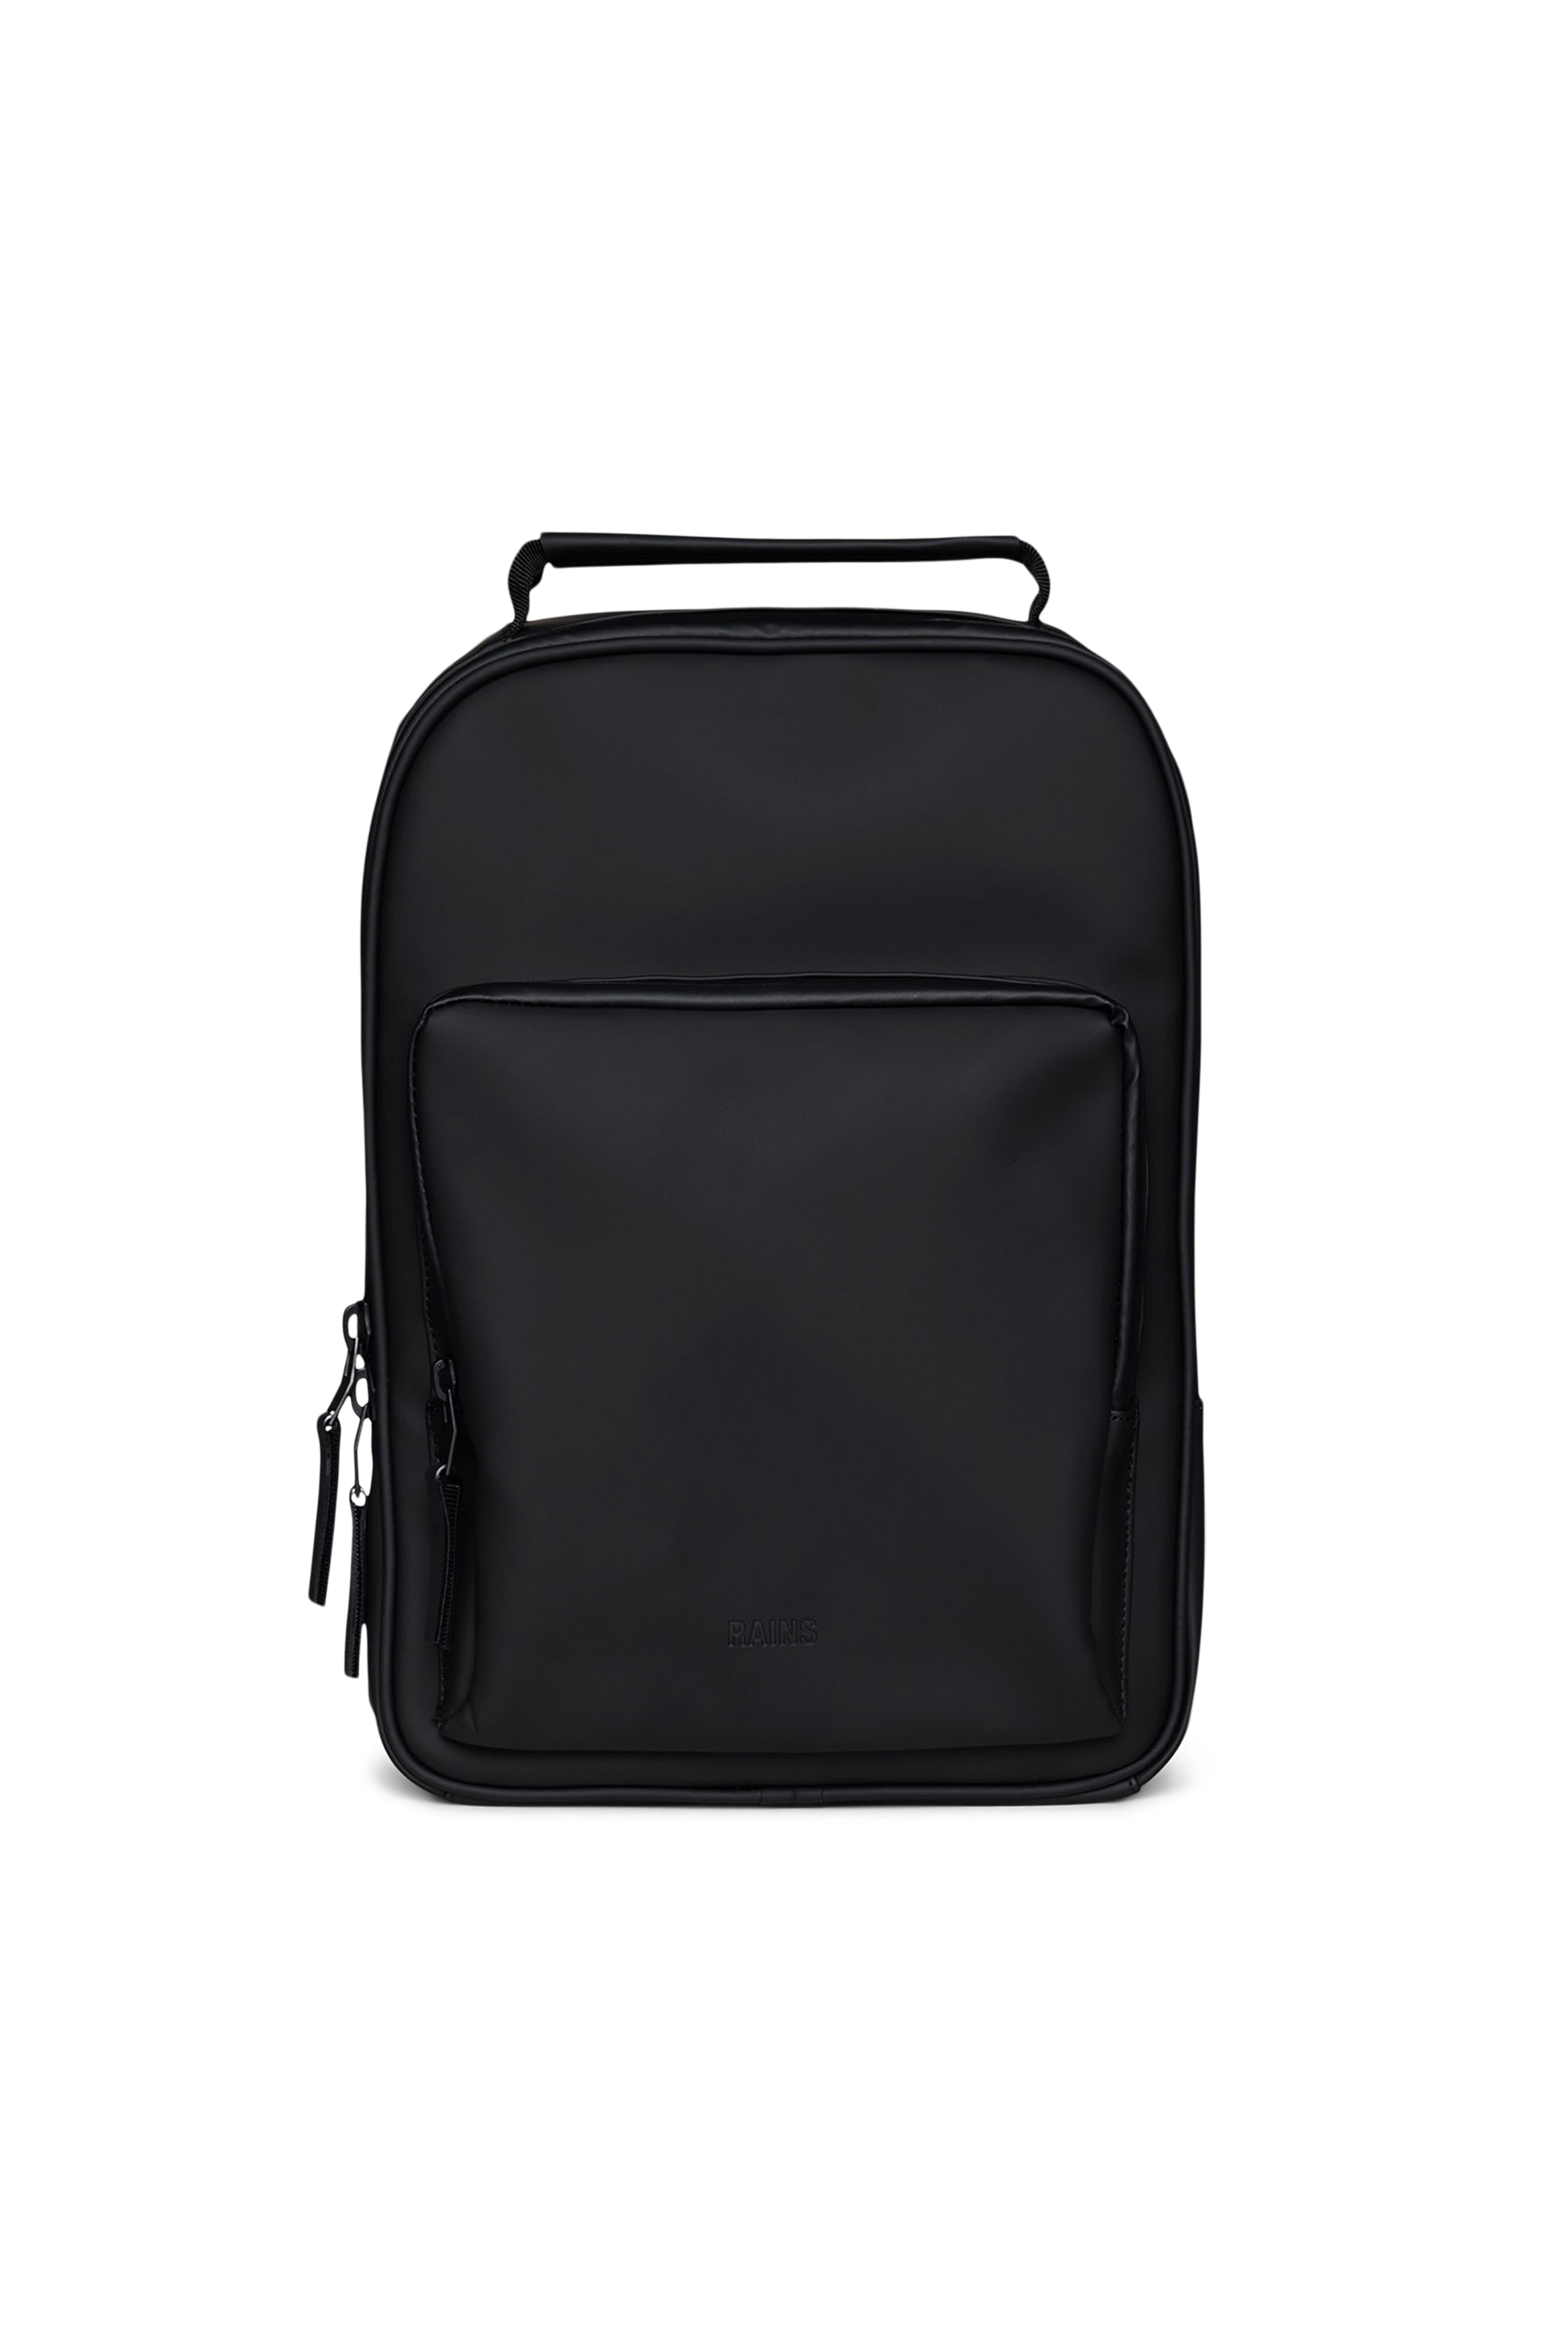 Rains® Book Daypack in Black for £105 | Free Shipping